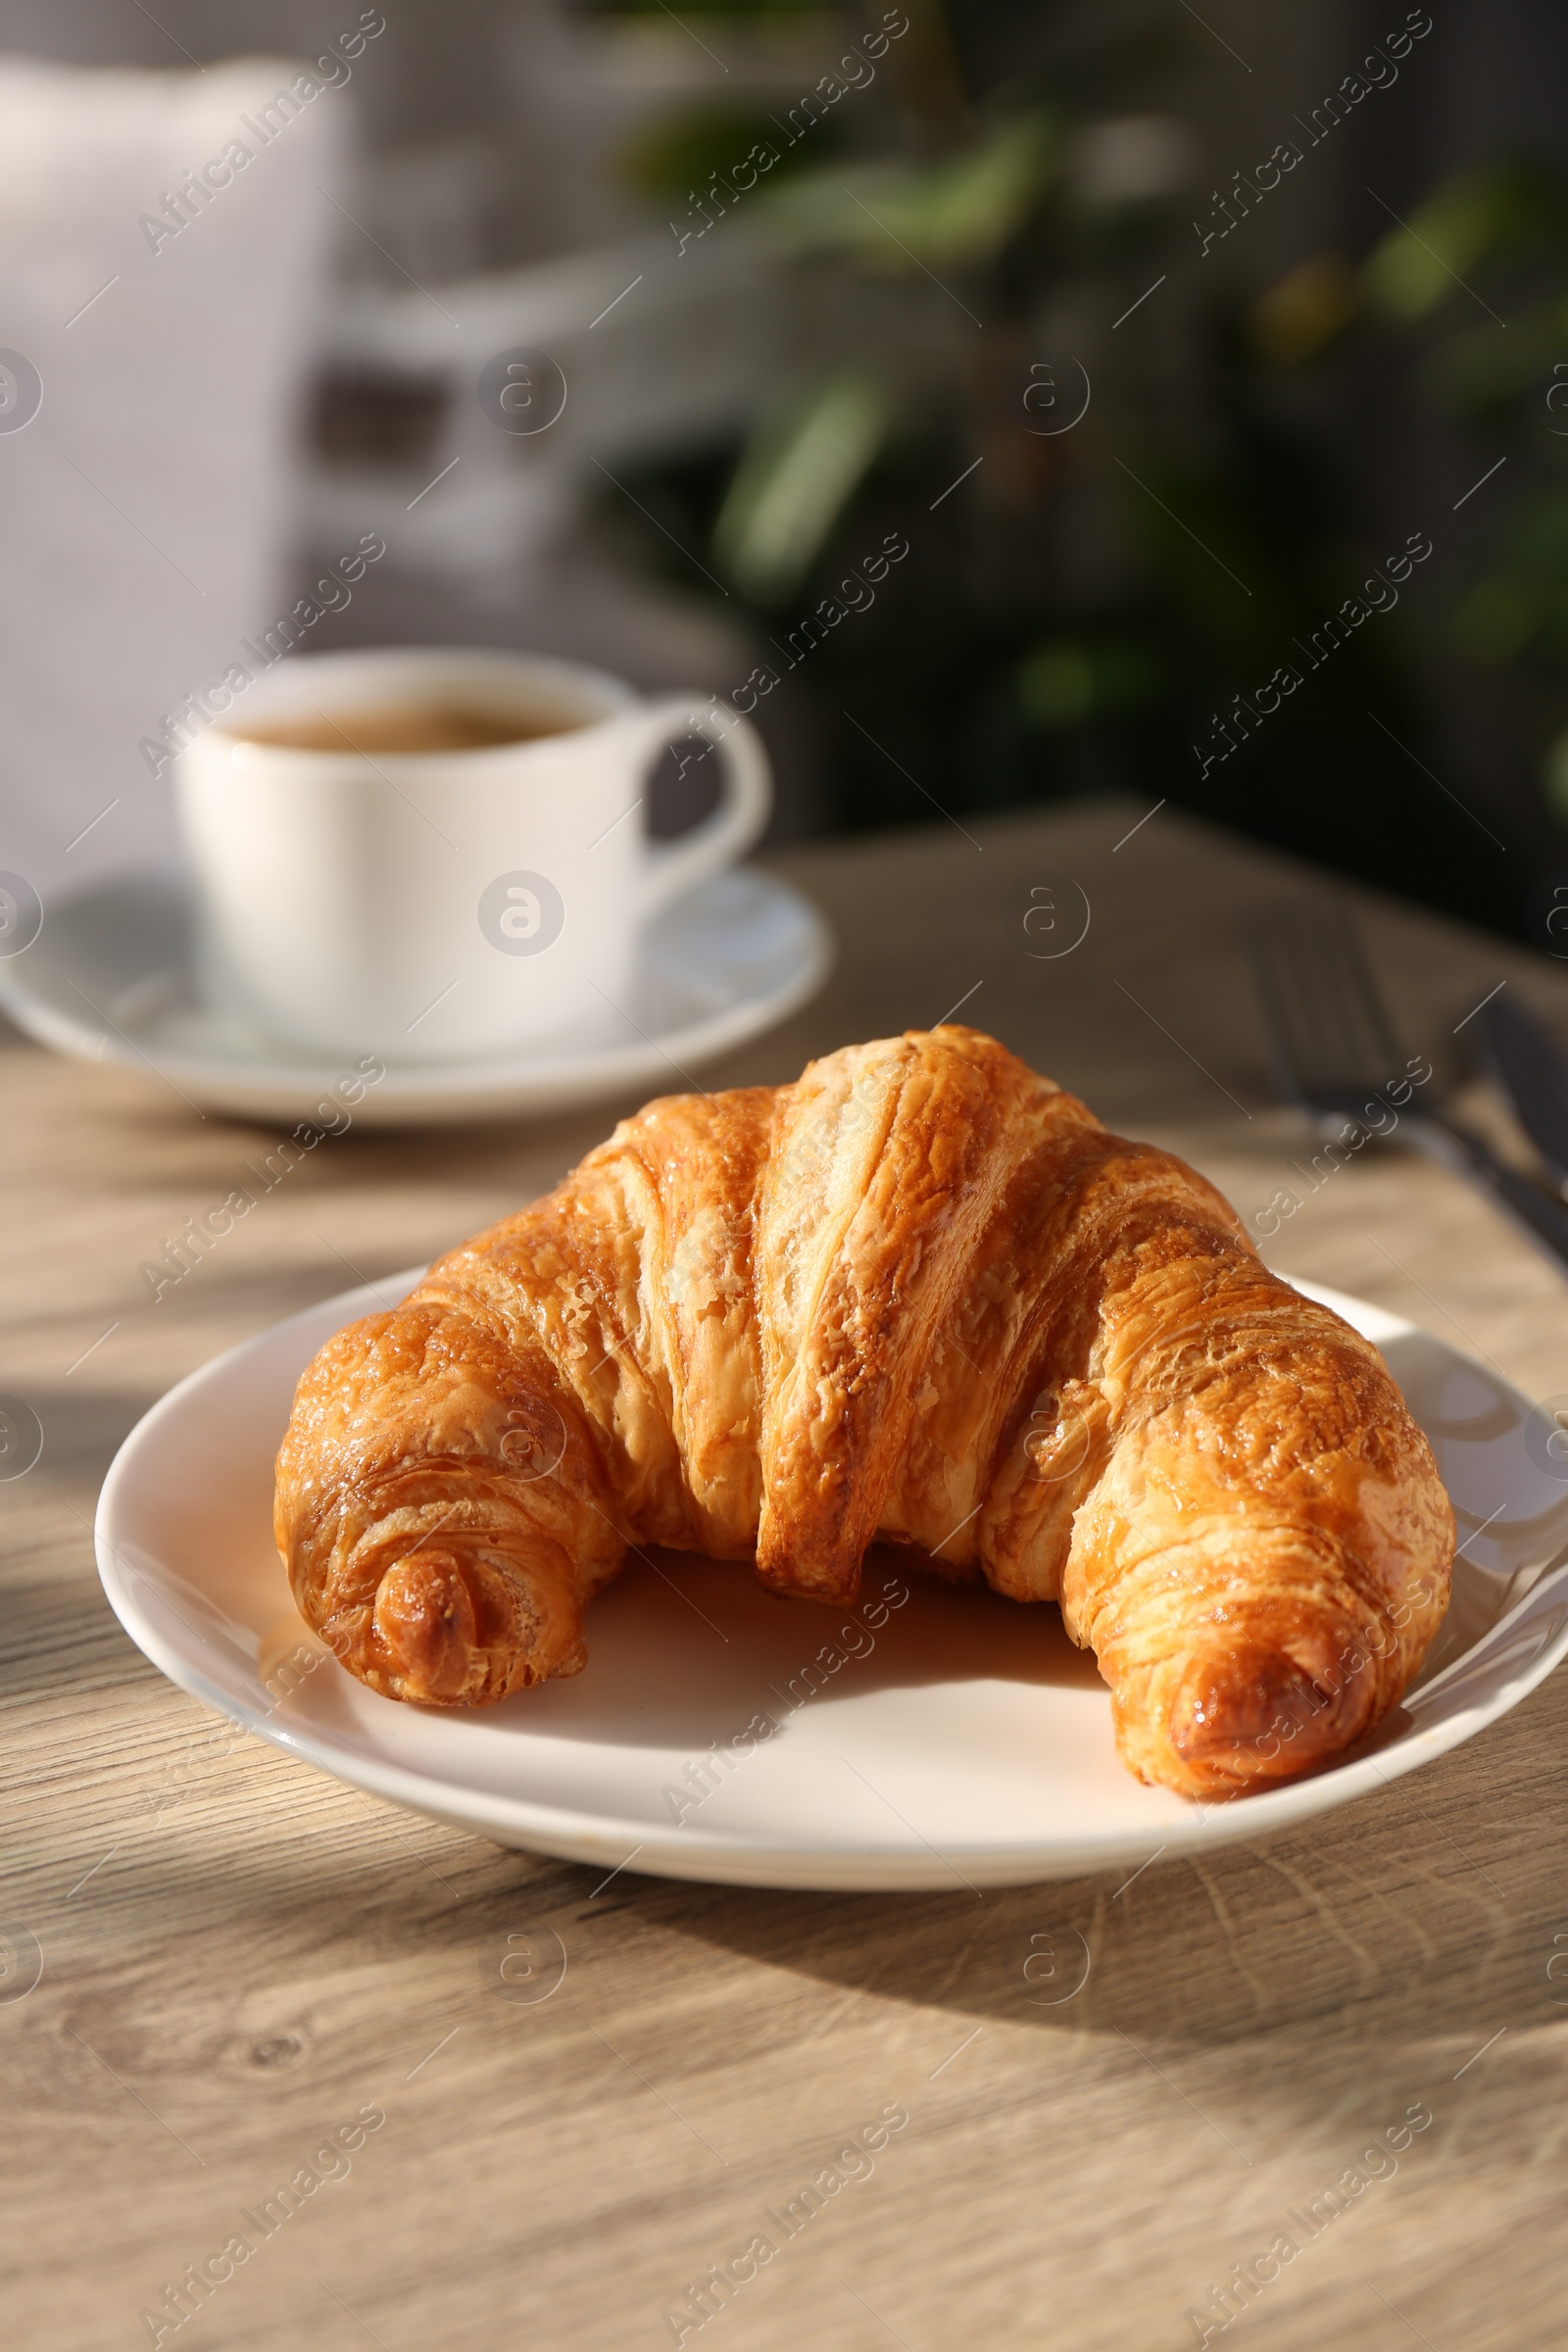 Photo of Delicious fresh croissant served on wooden table